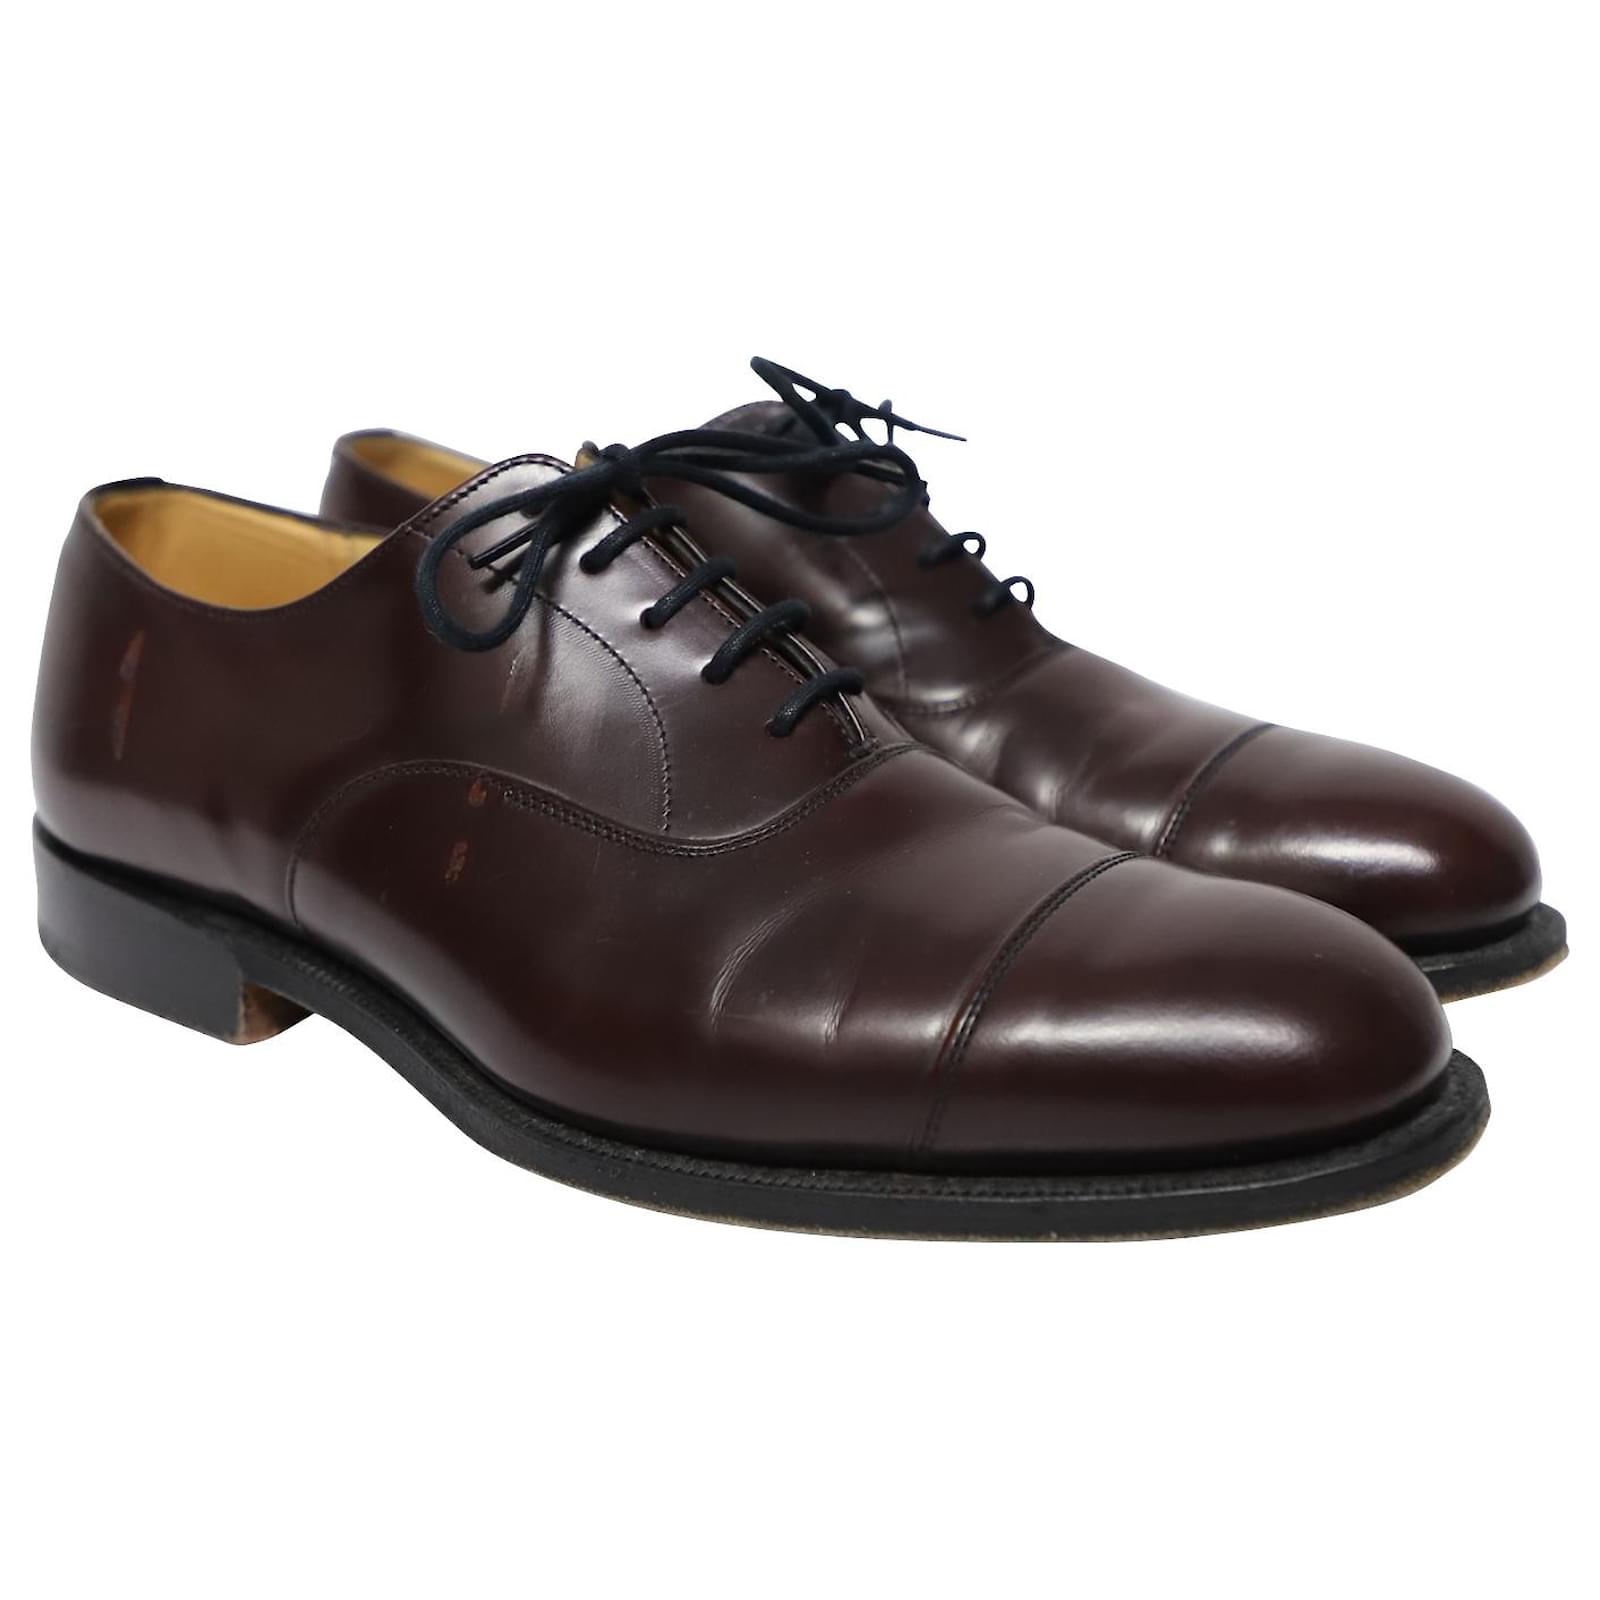 Church's Consul 173 Binder Polished Oxford in Burgundy Leather Dark red ...